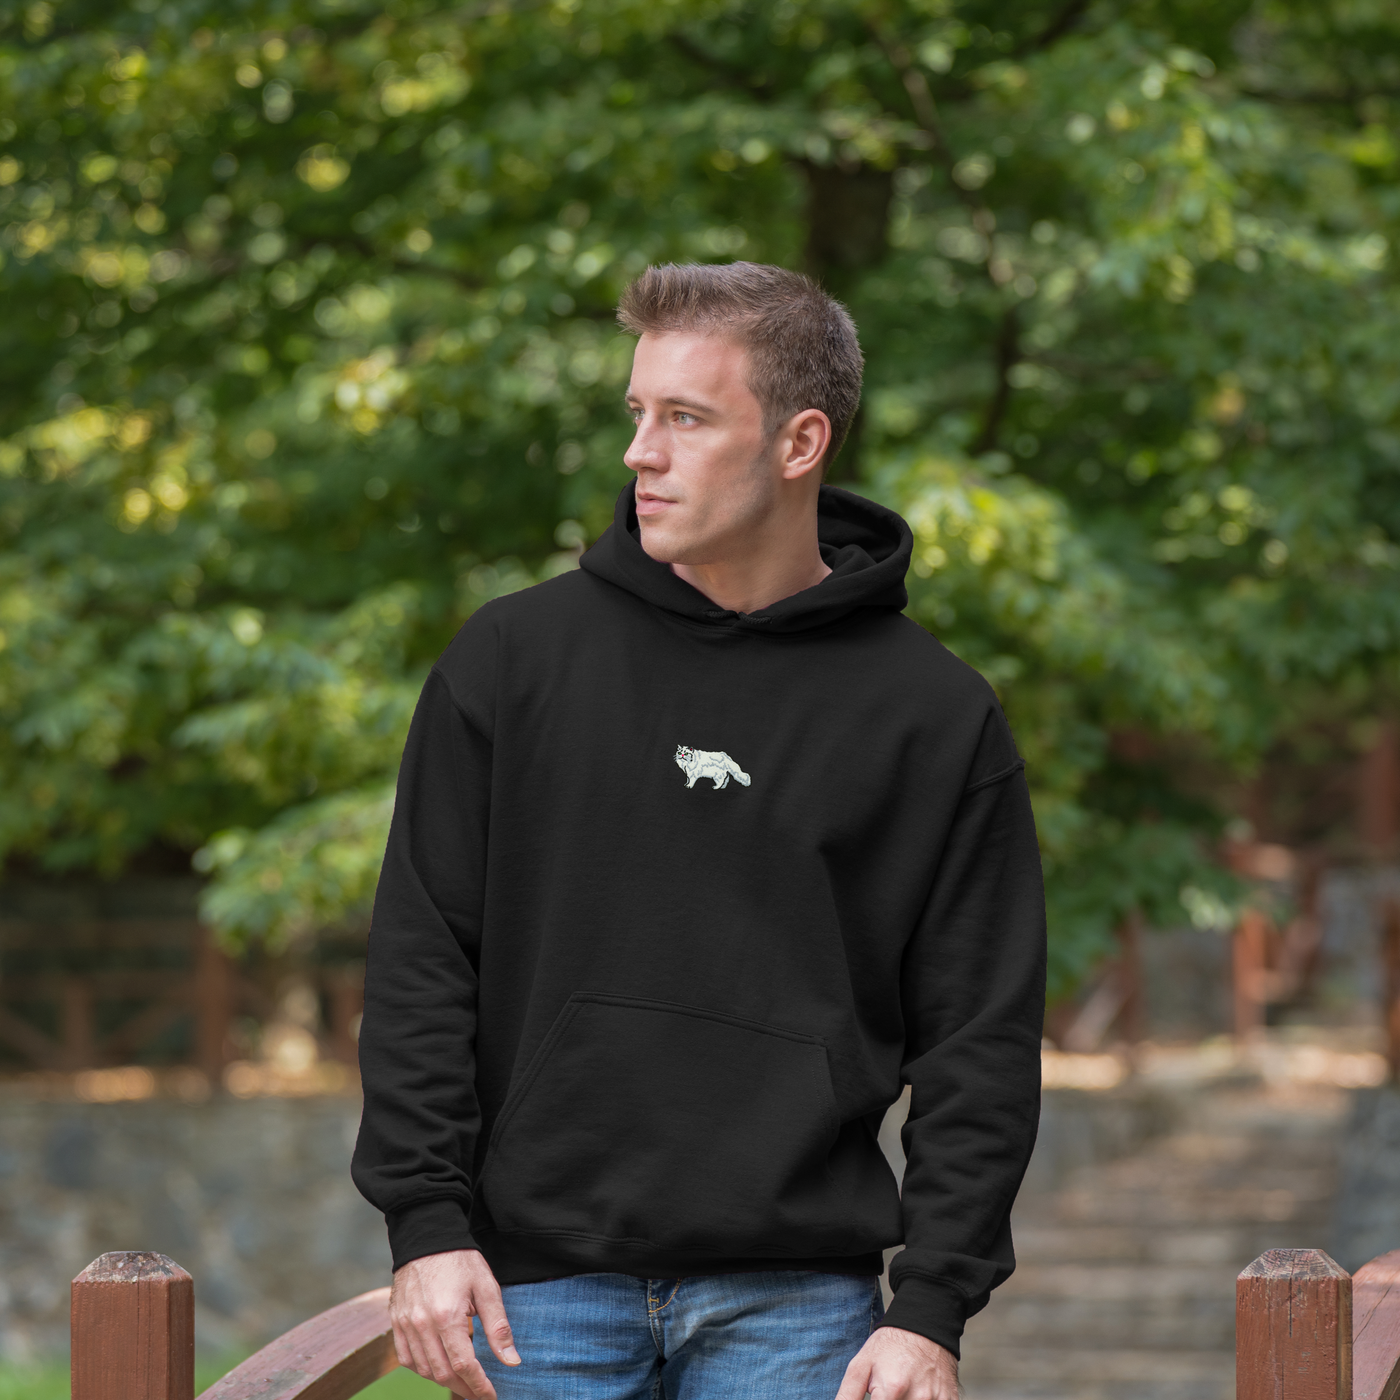 Bobby's Planet Men's Embroidered Persian Hoodie from Paws Dog Cat Animals Collection in Black Color#color_black